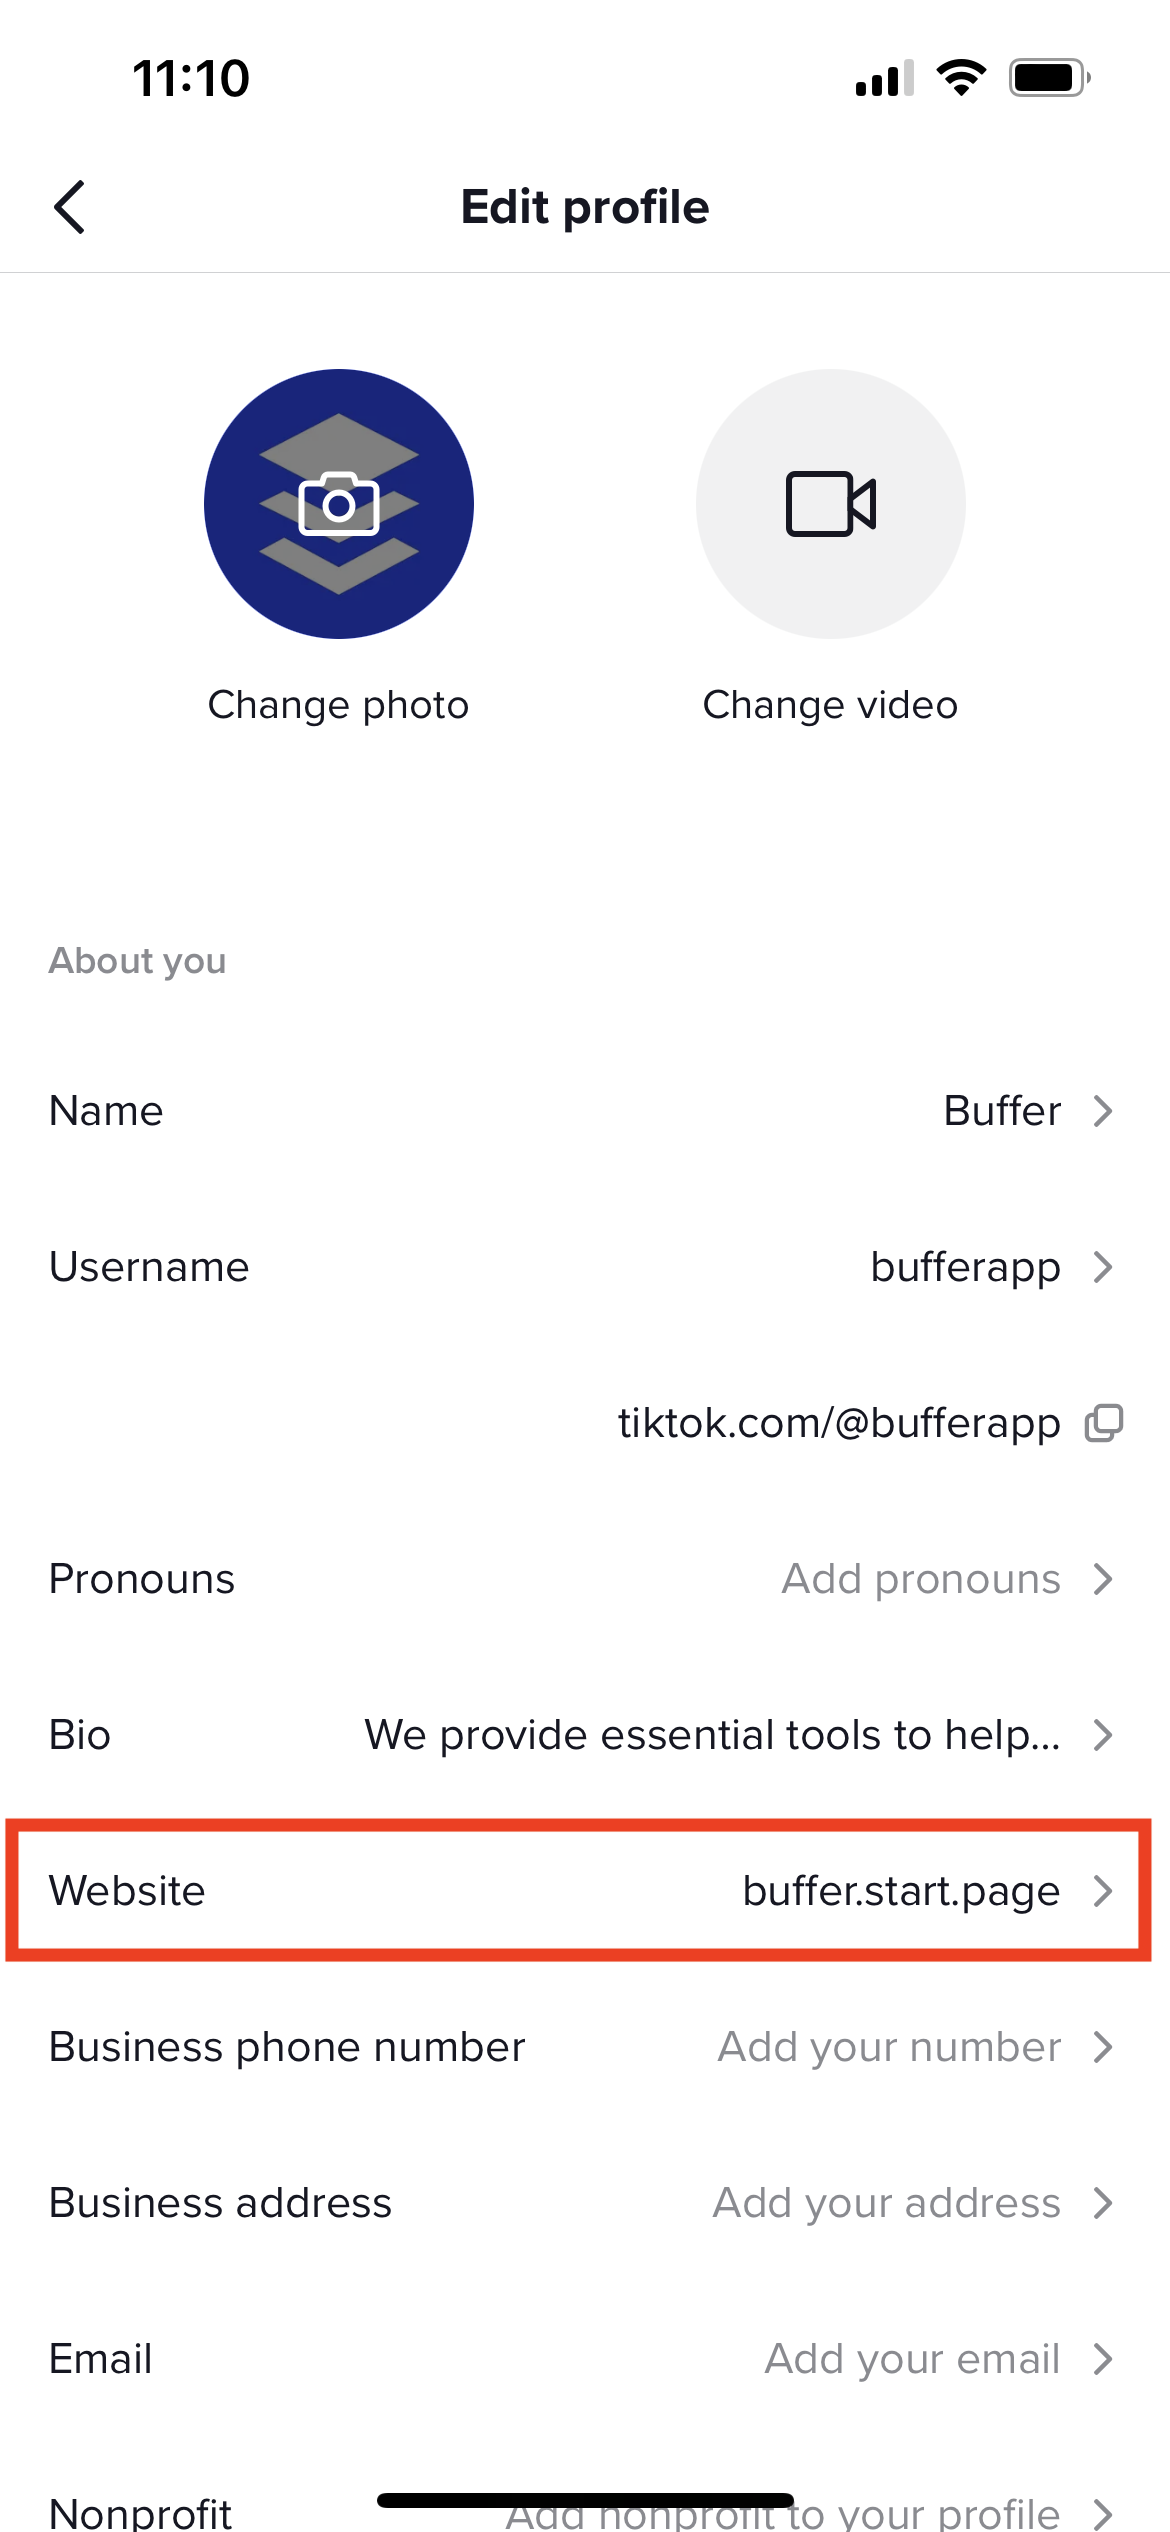 TikTok 'Ban' Bill Signed into Law: What It Means for Buffer and How Creators & Marketers Can Prepare